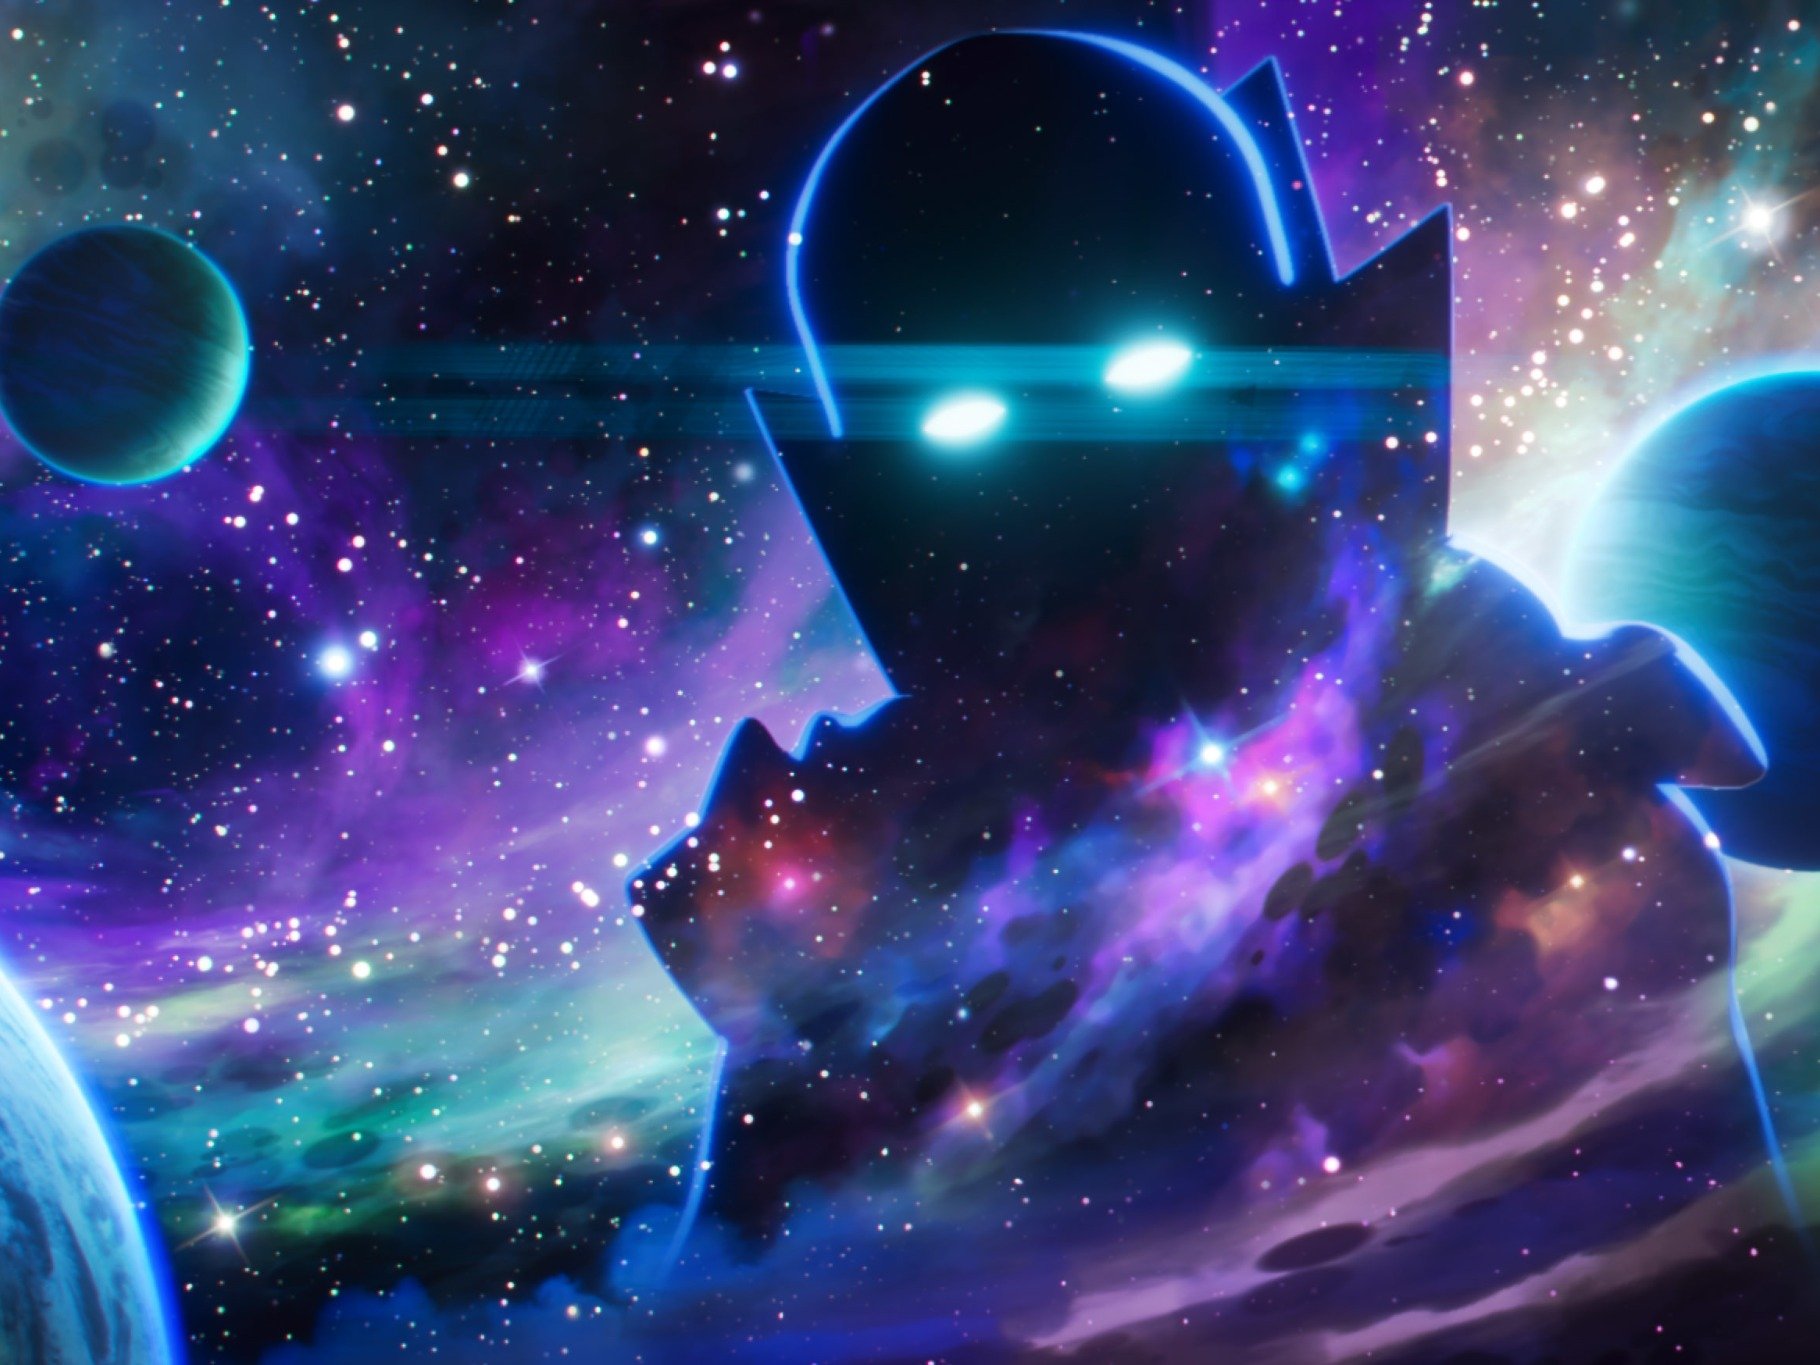 The Watcher in Marvel's 'What If...?' In the image, he's wearing a cloack and appears in the middle of the galaxy. The Watcher makes big decisions in 'What If...?' Episode 8 and Episode 9.